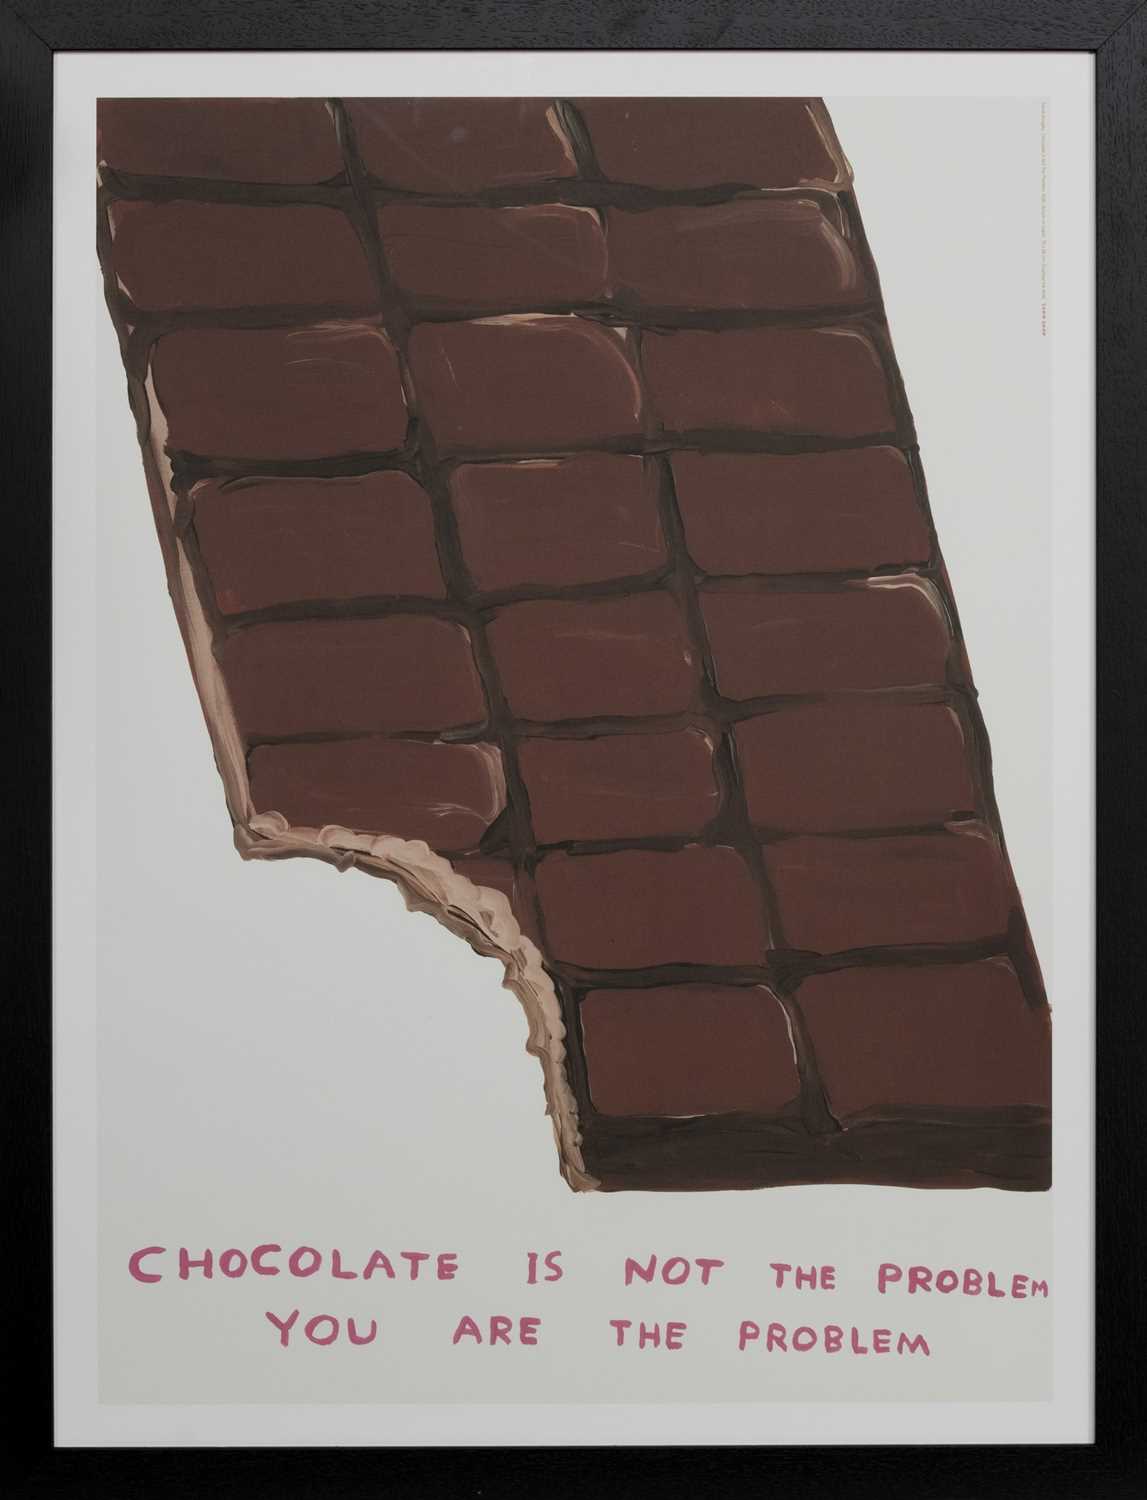 Lot 128 - CHOCOLATE IS NOT THE PROBLEM, A LITHOGRAPH BY DAVID SHRIGLEY